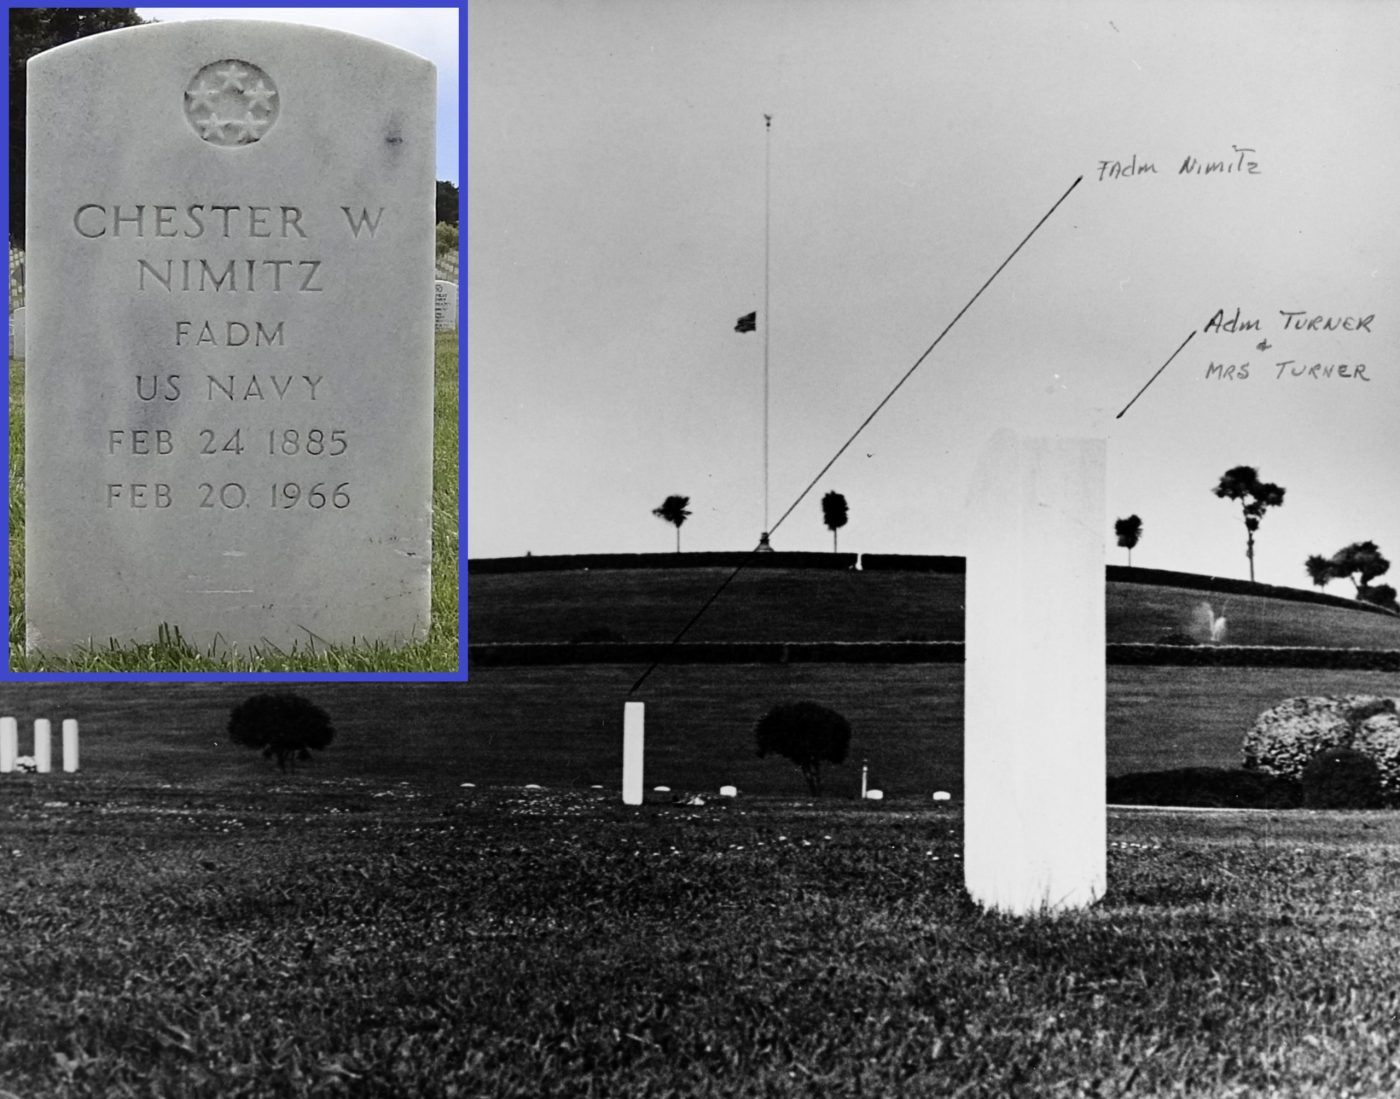 1966 photo showing Nimitz burial plot, with graves of Admirals Nimitz and Turner and space reserved for Admirals Spruance and Lockwood (NHHC) Inset: Nimitz headstone. (NCA image)